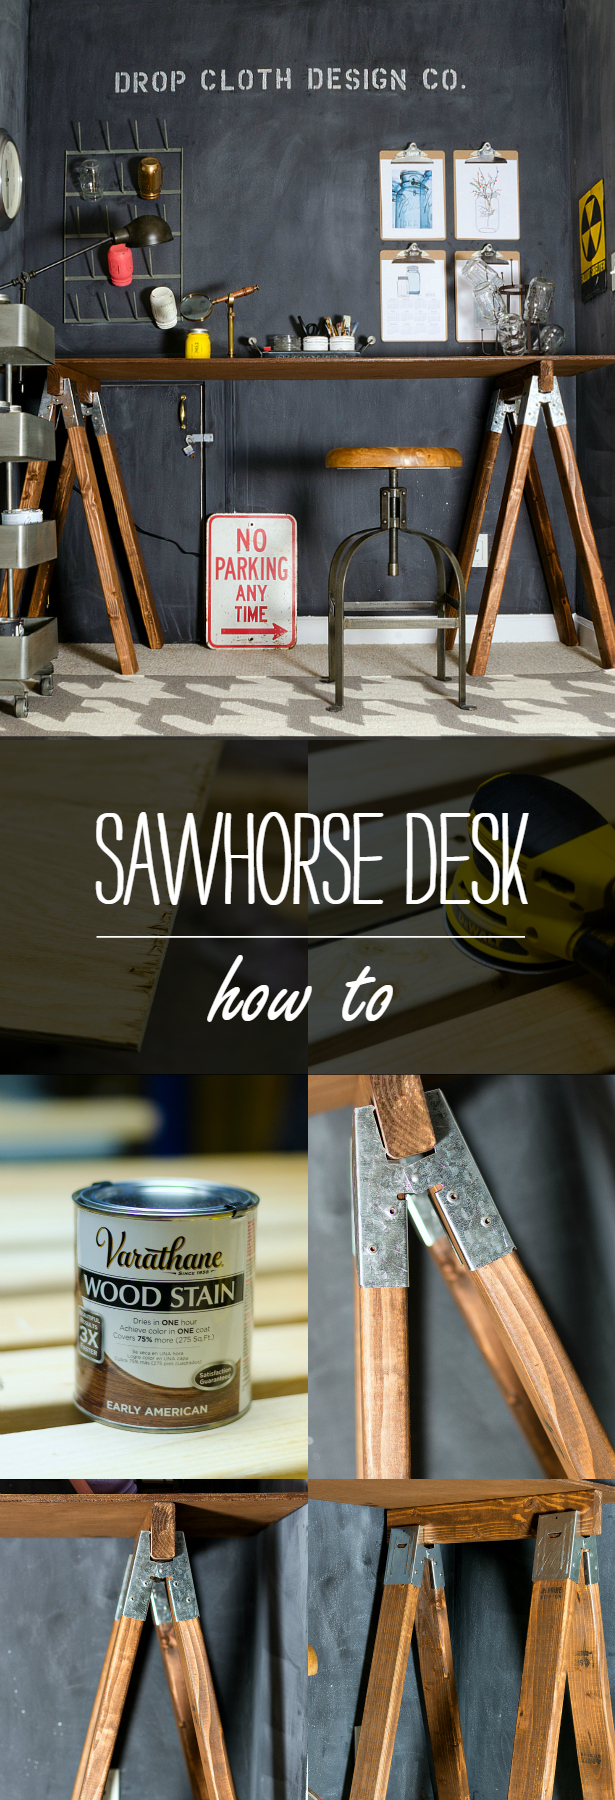 Sawhorse Desk DIY How To Make Your Own